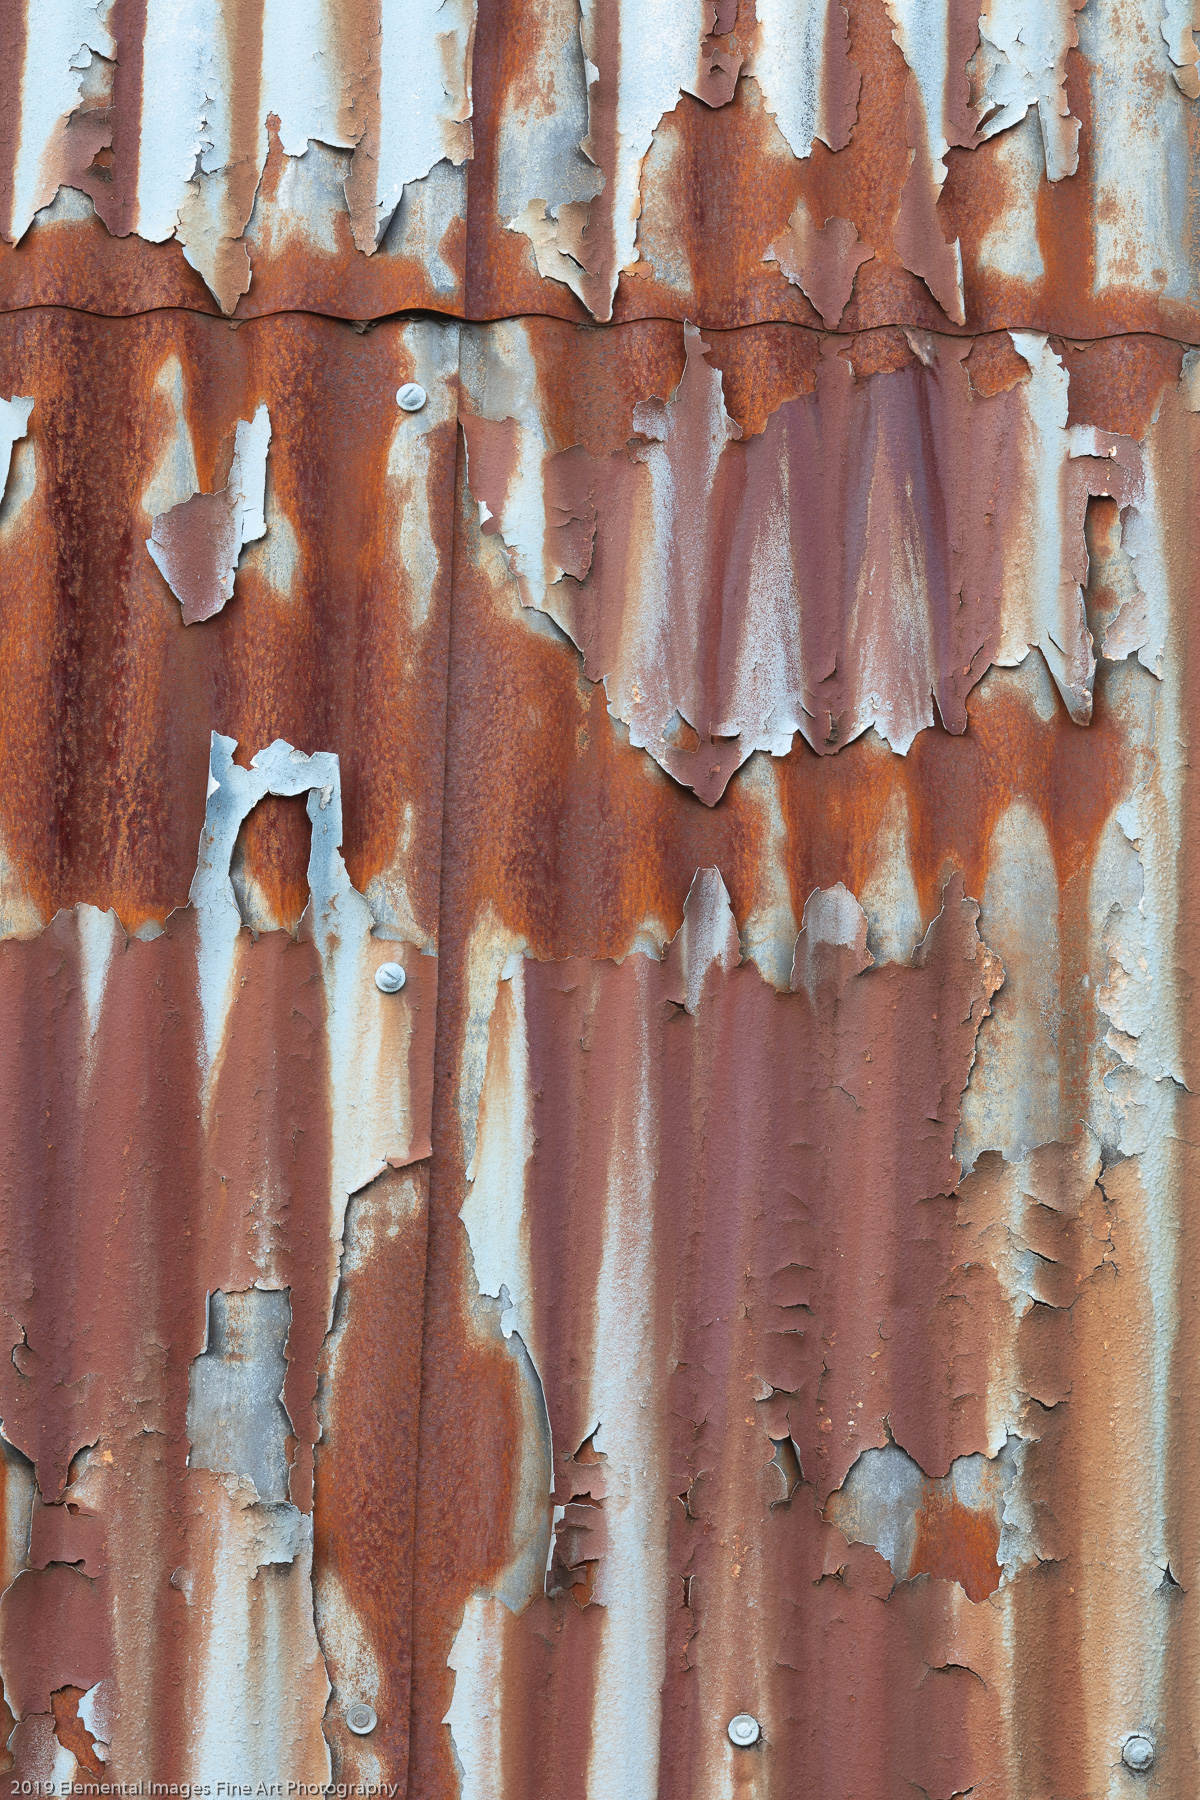 Rust #12 |  |  | USA - © 2019 Elemental Images Fine Art Photography - All Rights Reserved Worldwide